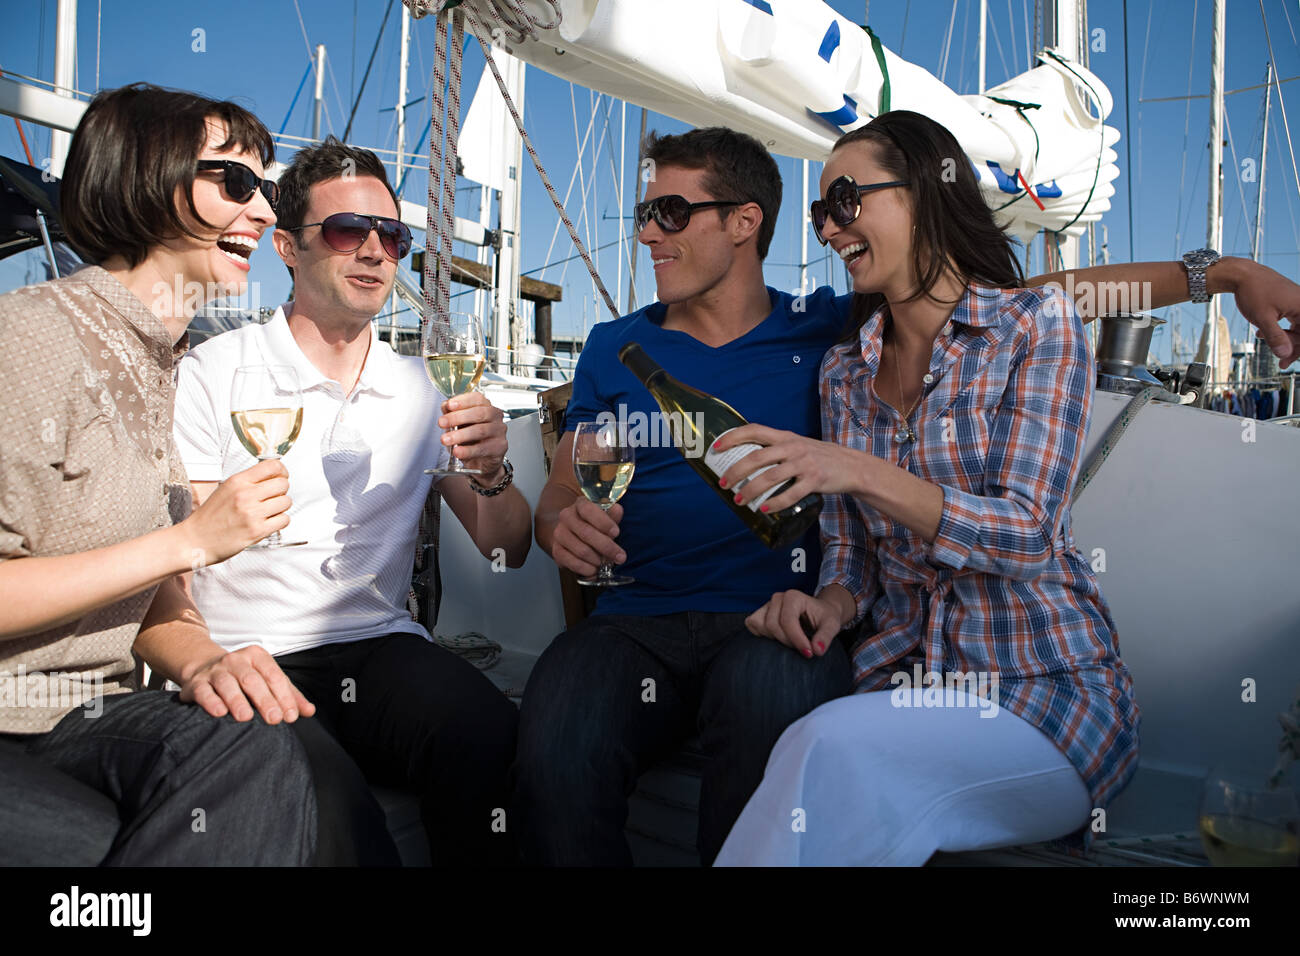 Friends drinking wine on a boat Stock Photo